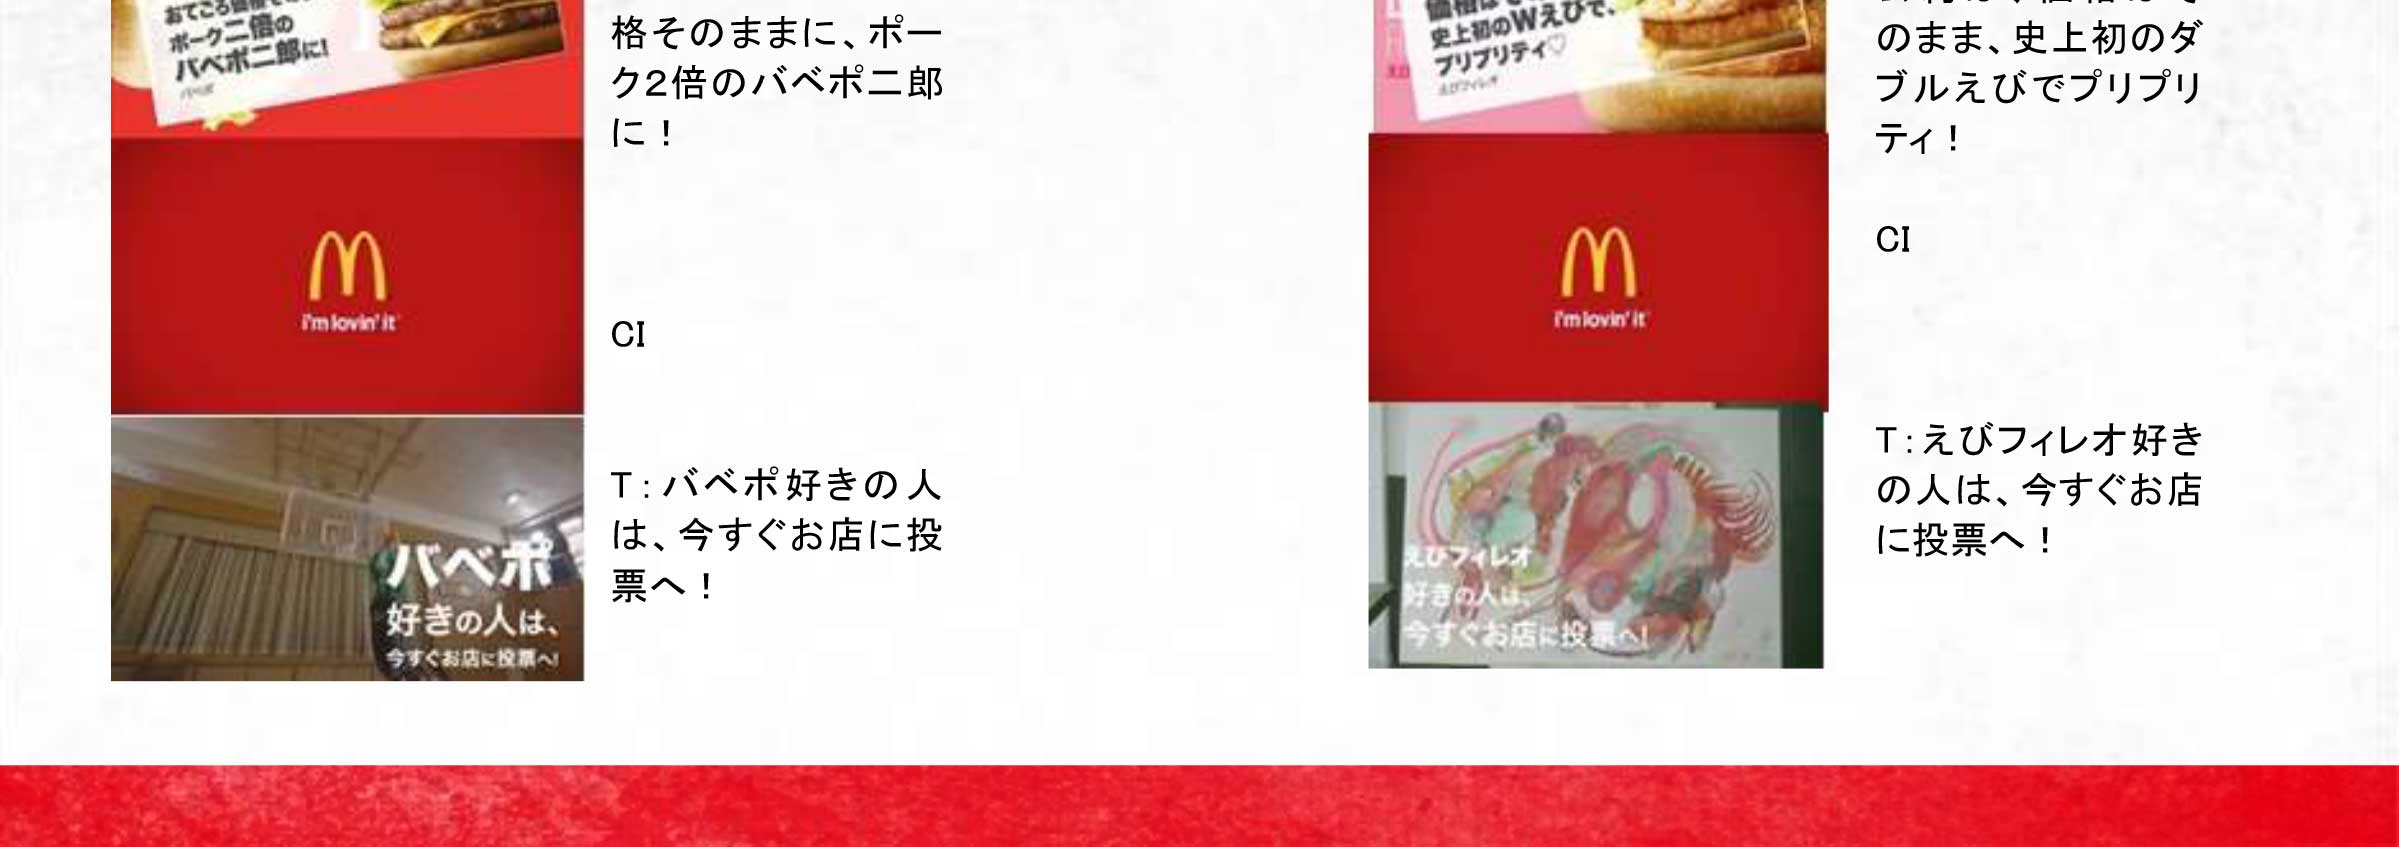 Welcome to McDonald's Holdings Japan